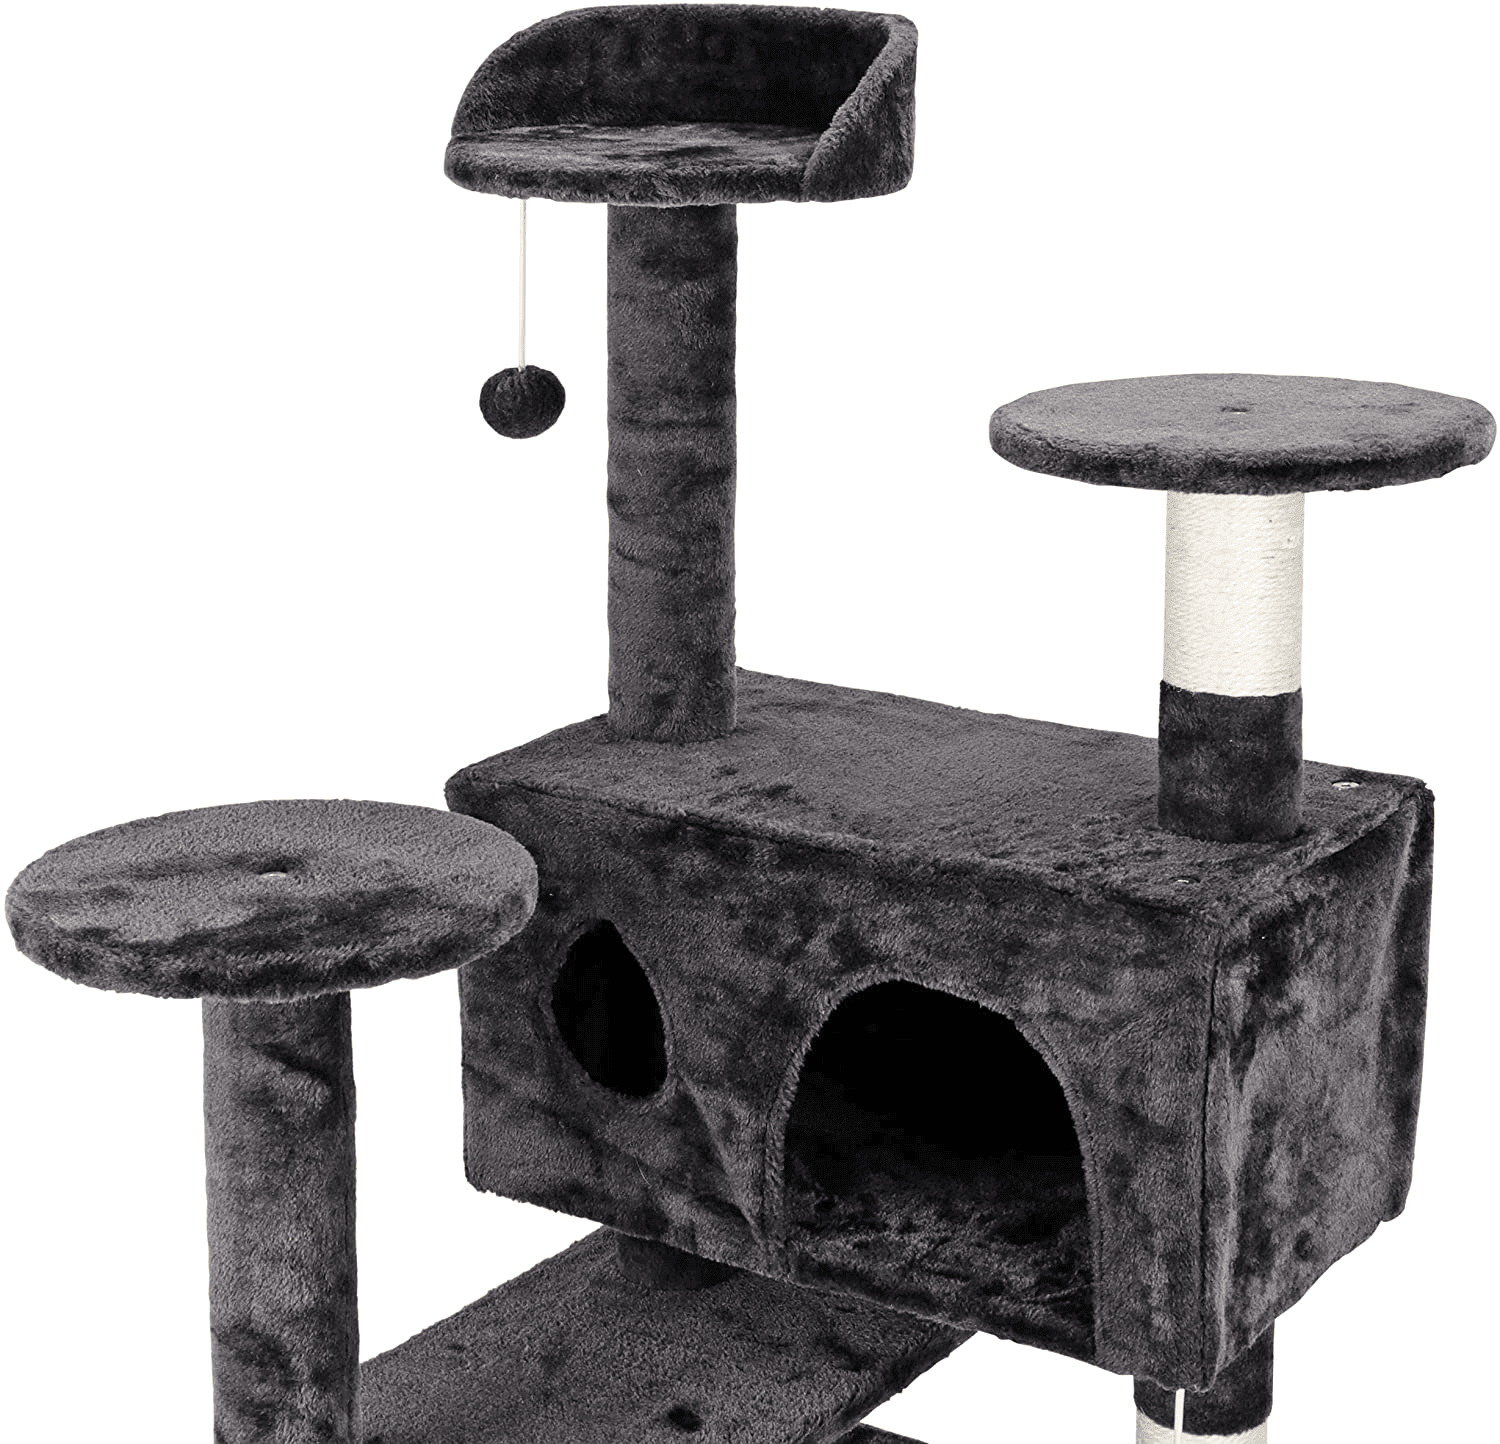 53‘‘ Cat Tree with Sisal-Covered Scratching Posts and 2 Plush Rooms Cat Furniture for Kittens